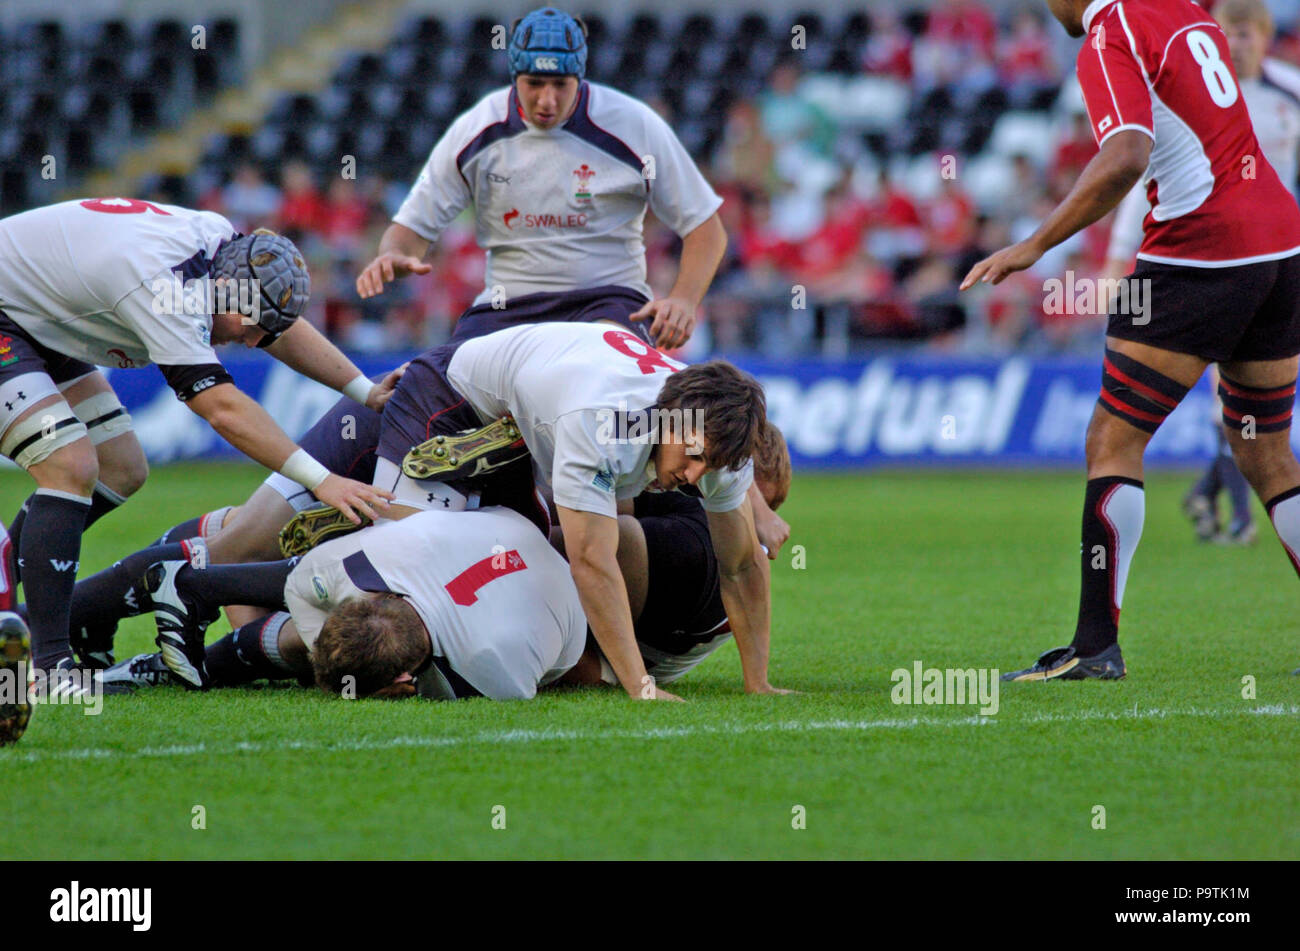 Sam Warburton of Wales in action at The Junior Rugby World Cup pool D matches at the Liberty Stadium in Swansea in 2008. Stock Photo